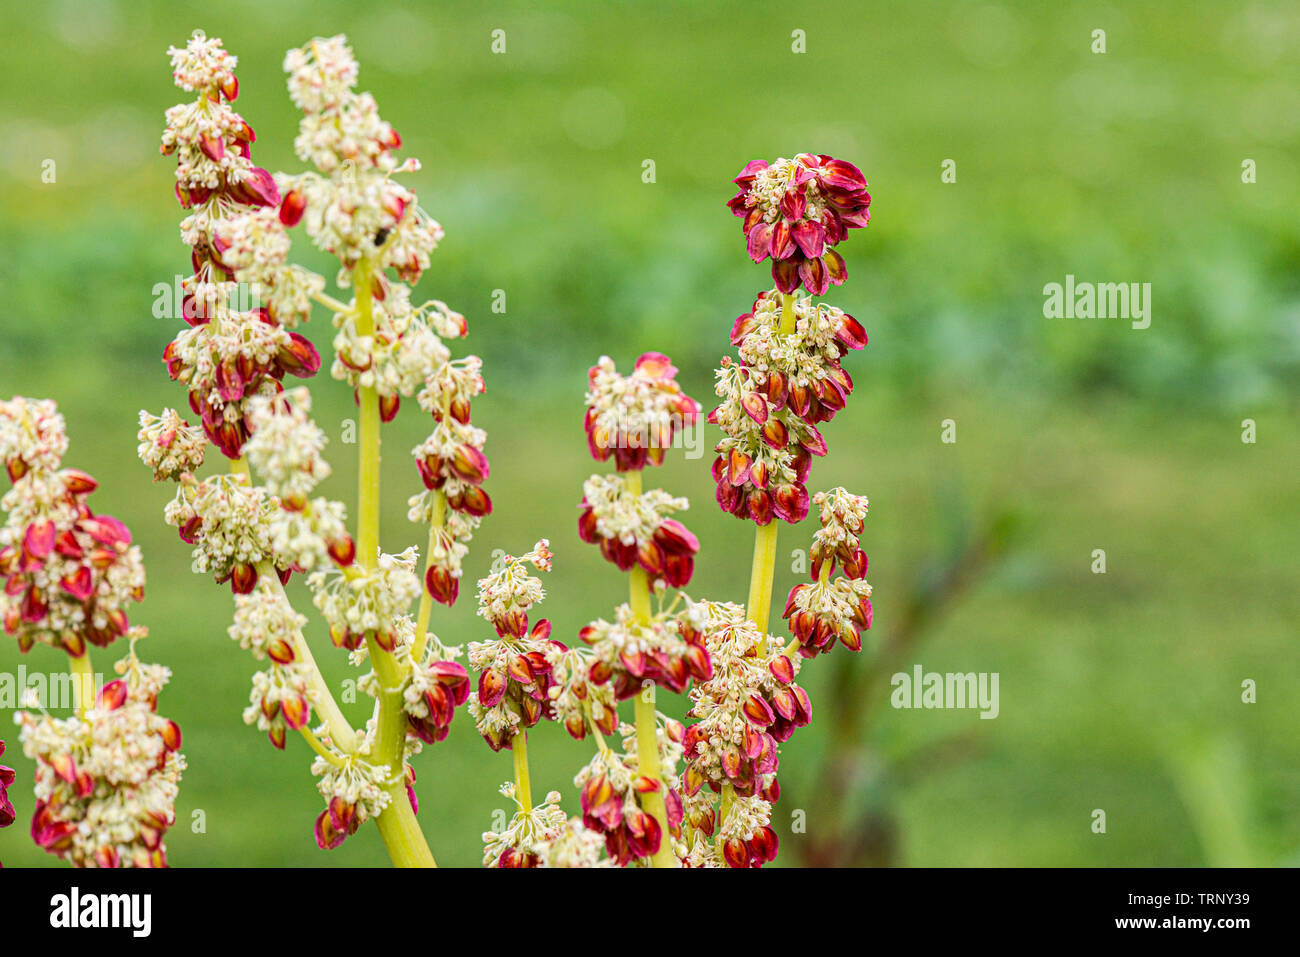 The flowers and seedpods of a rhubarb Stock Photo